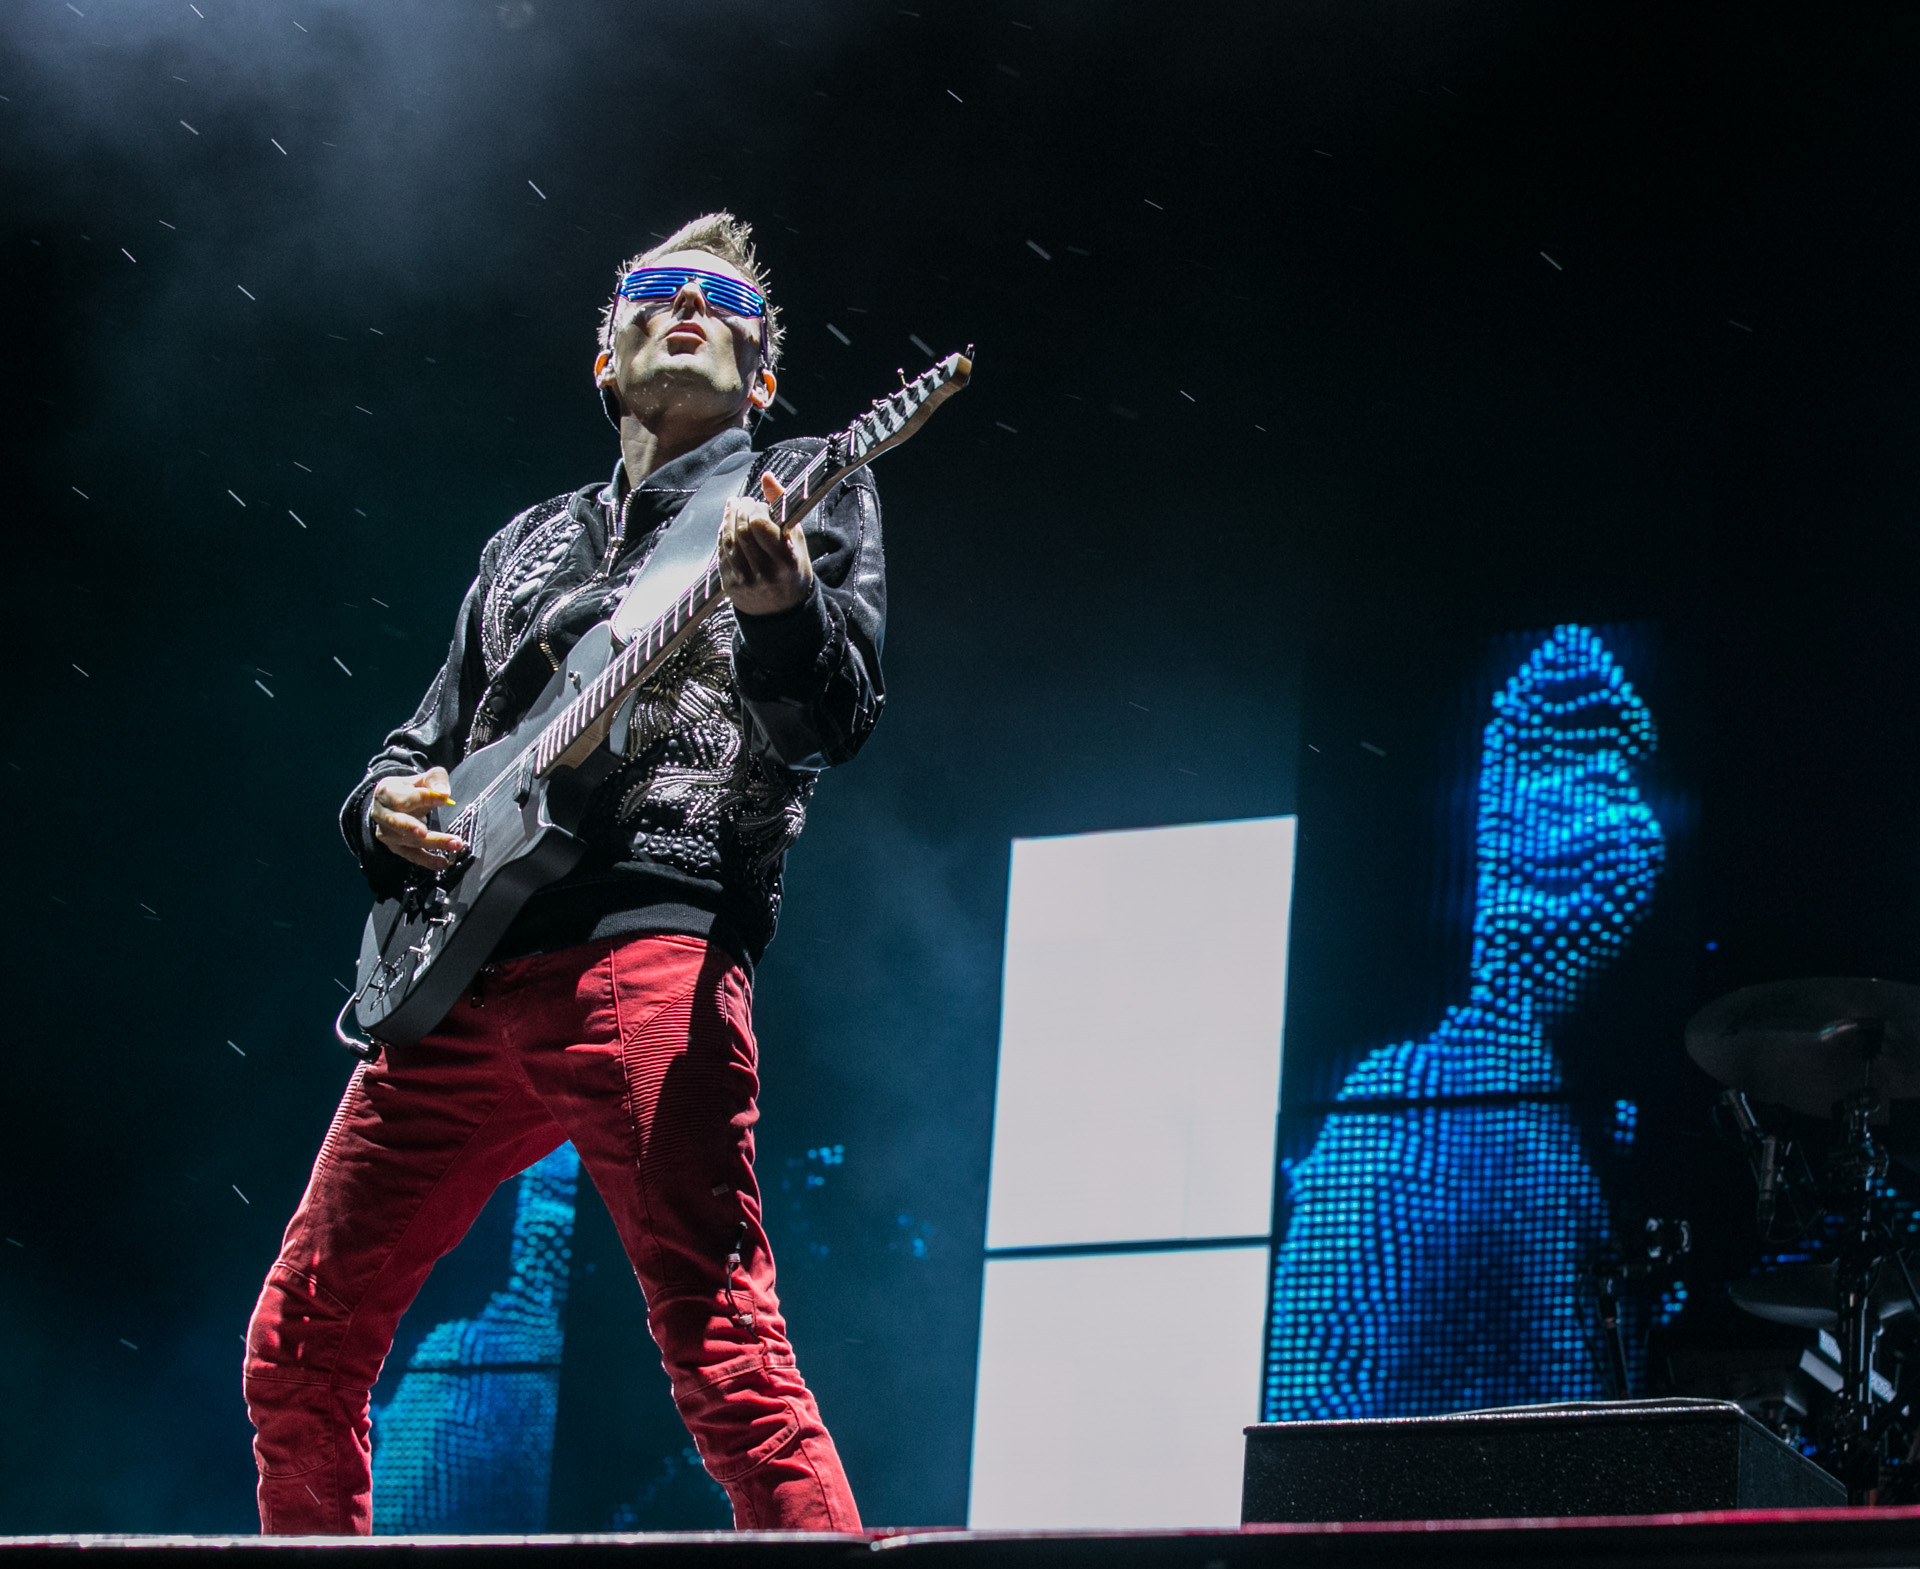 Muse by Pat Beaudry @ Virgin River Stage Osheaga 2017